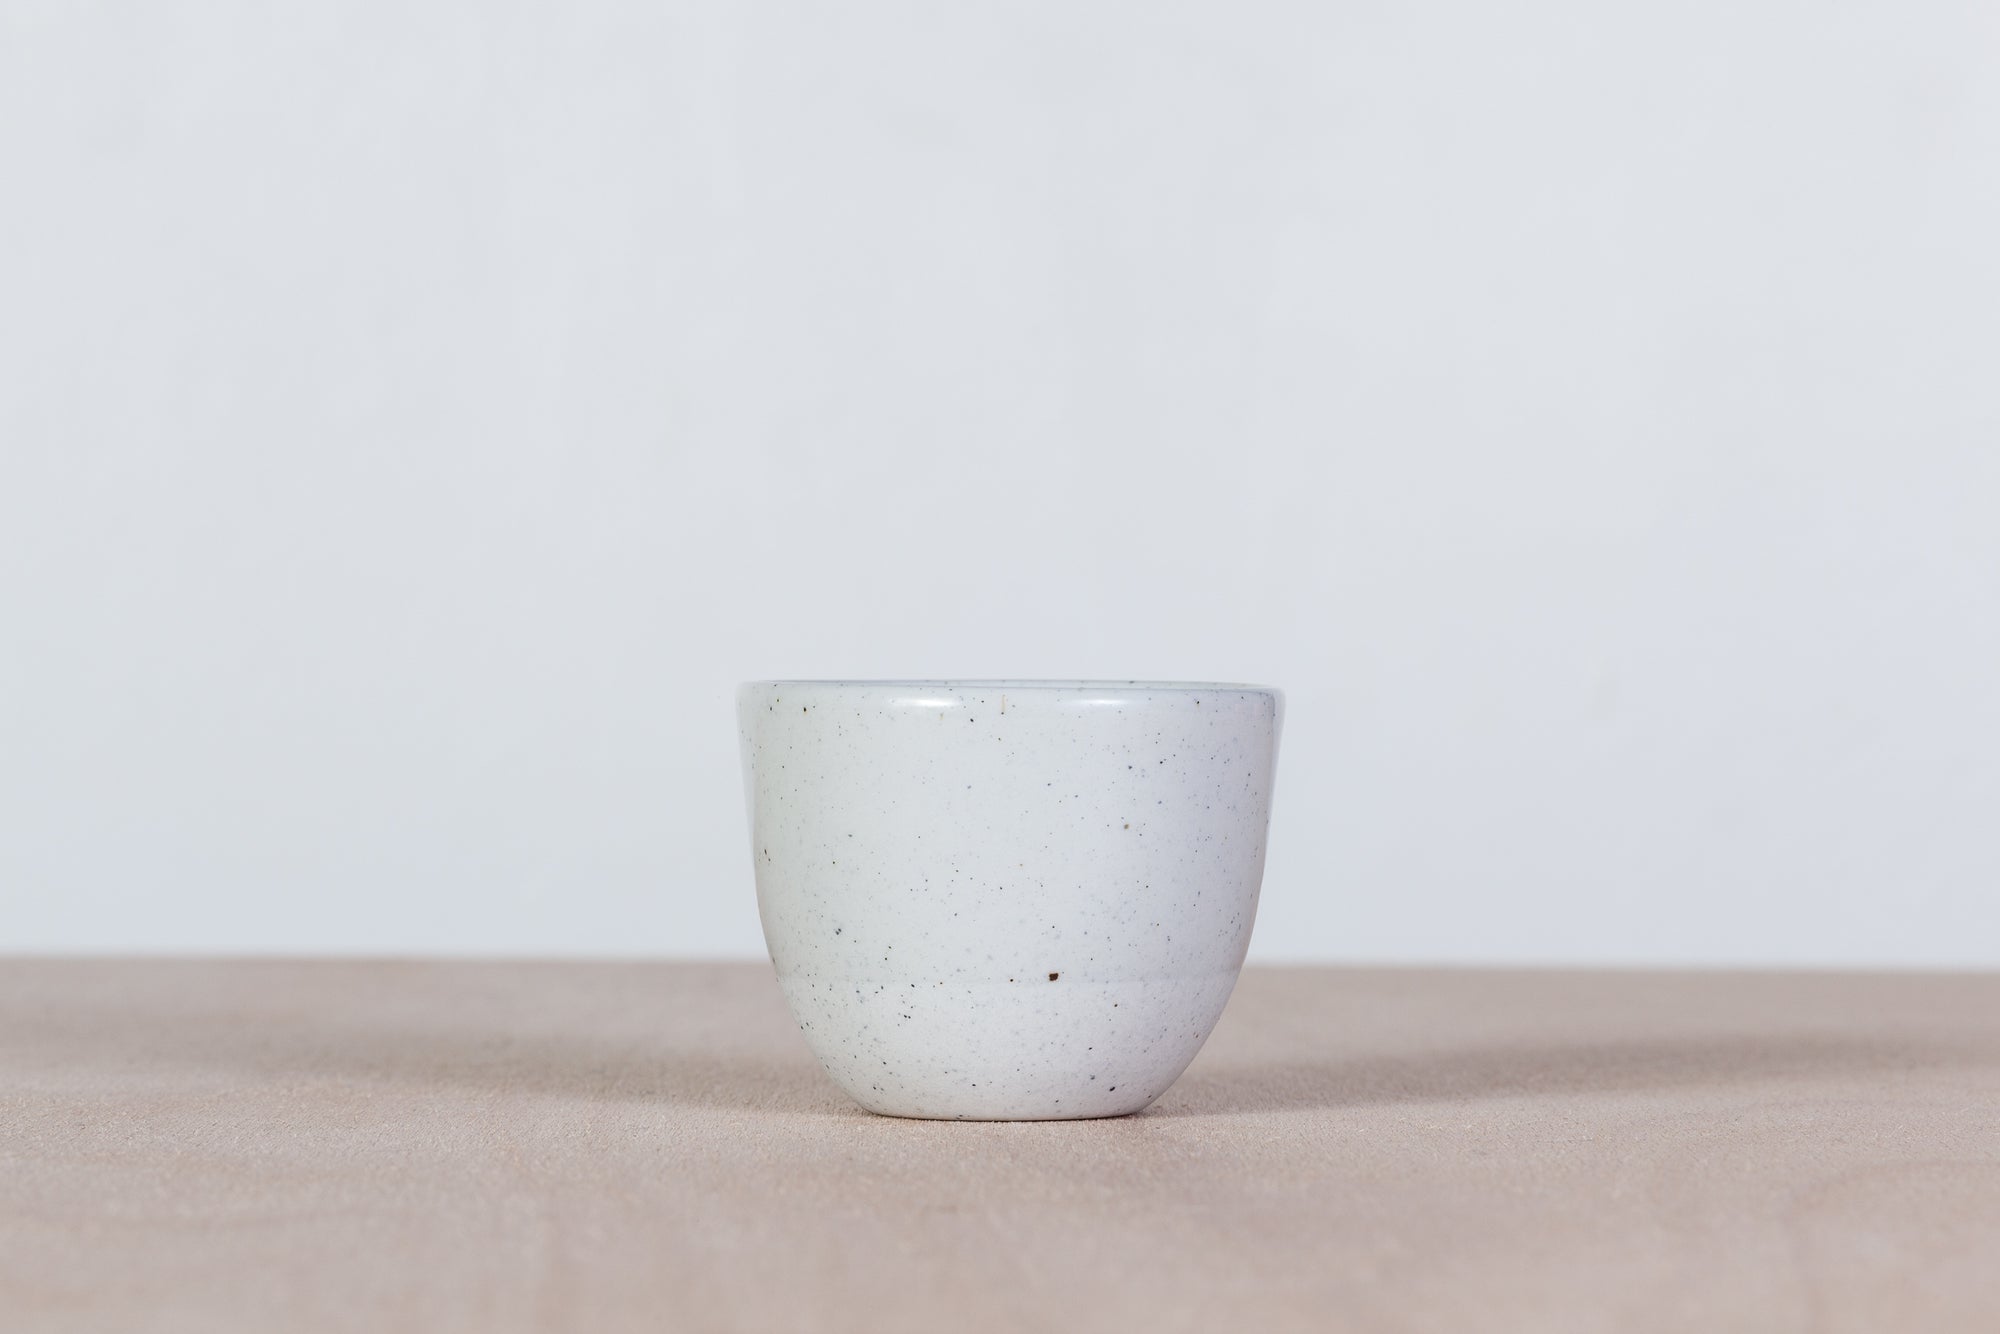 Simple gray cup with dots